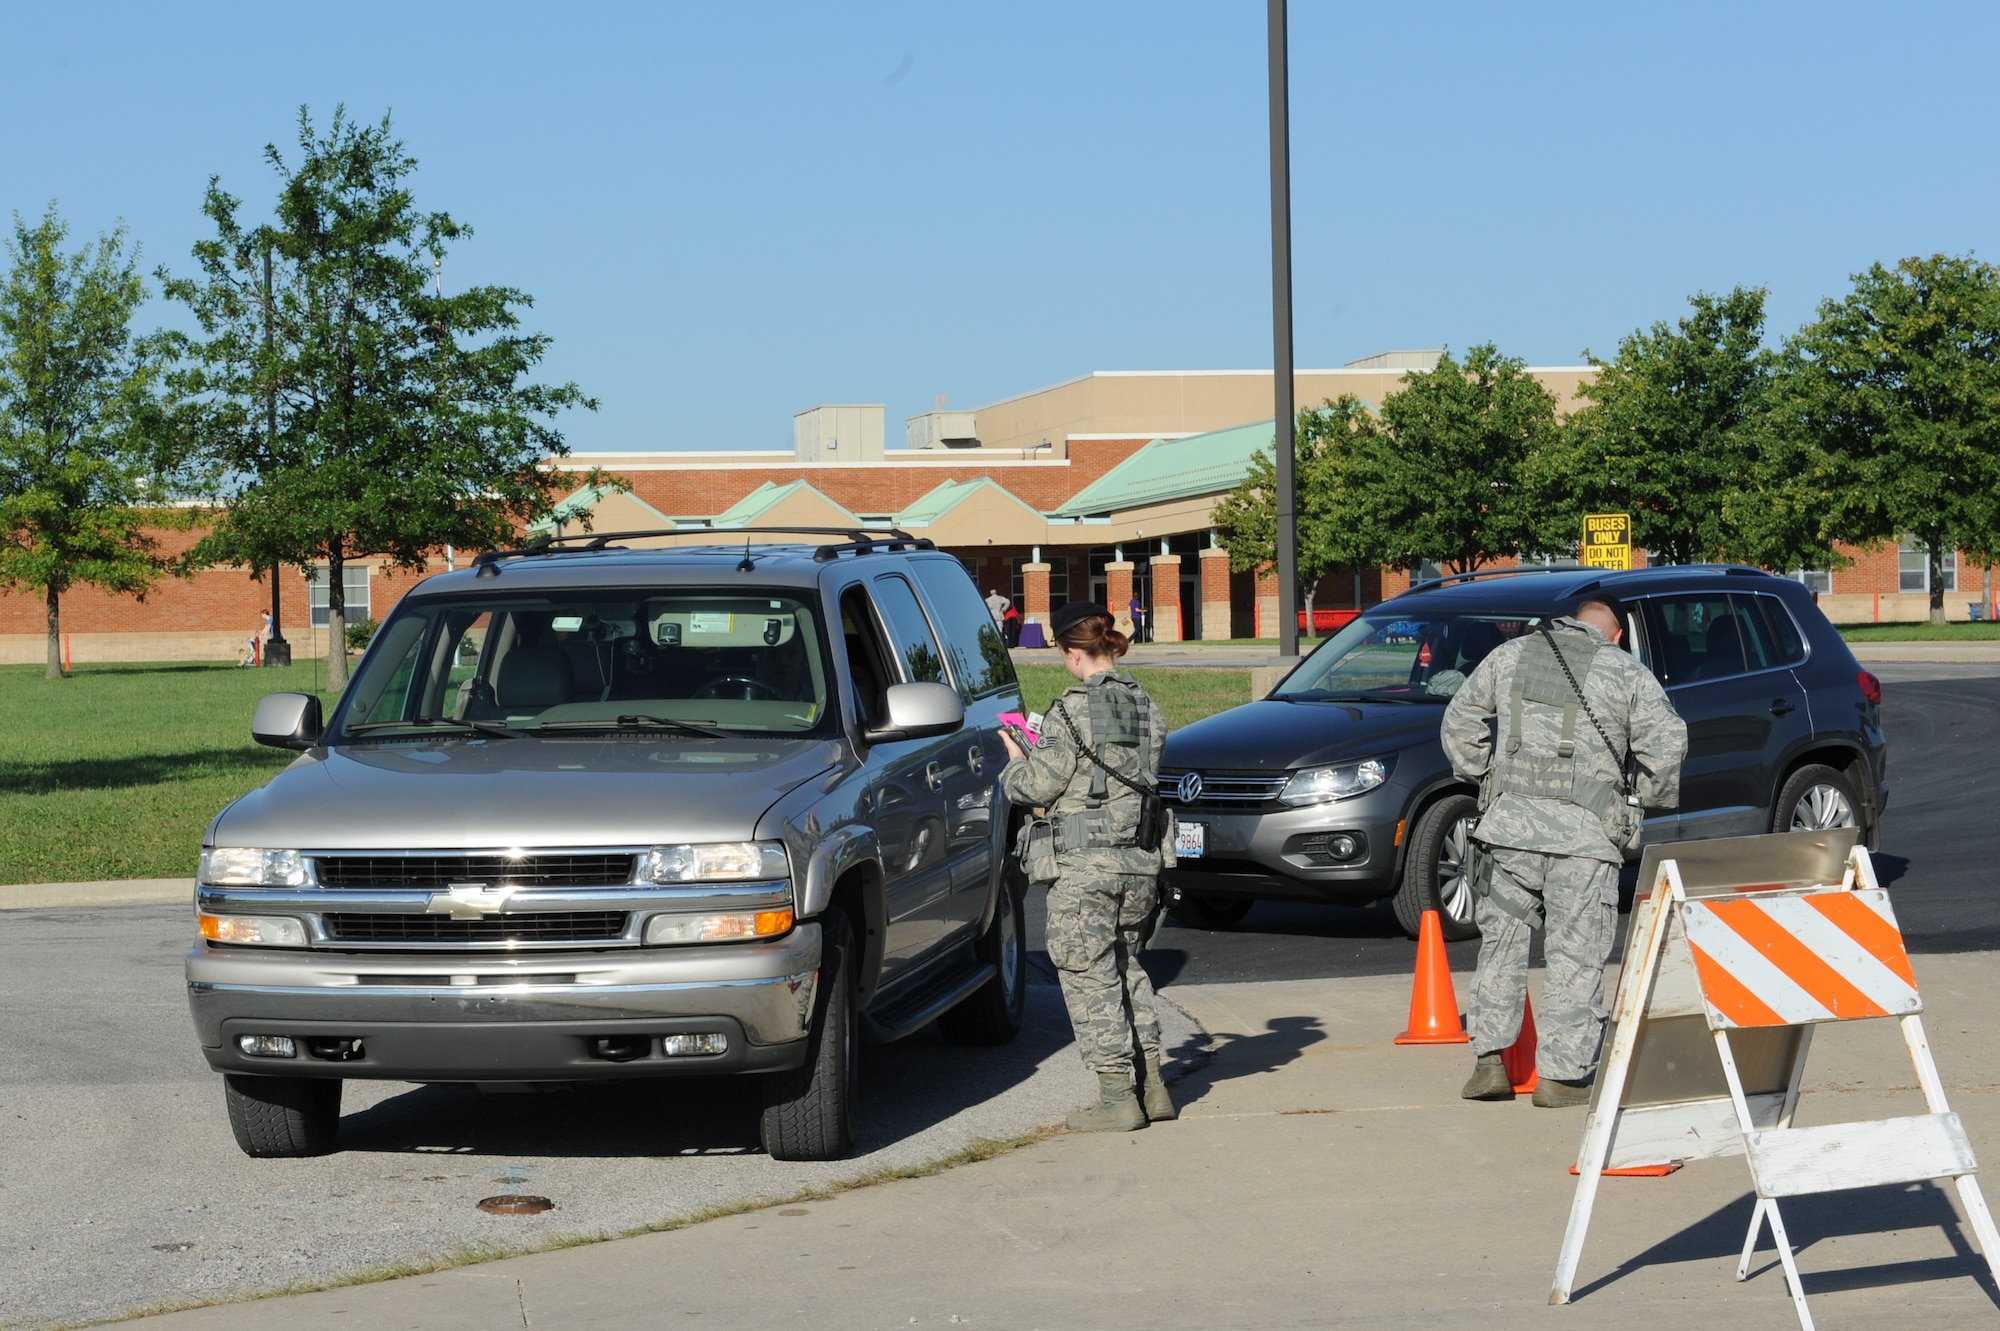 Members of the 375th Security Forces Squadron check driver’s identification as they exit Scott Elementary School and enter Scott Air Force Base, Ill. Drivers crossing from the elementary school to the base need to have their government ID card and a pink card from the school, giving them authorization to enter the base. (U.S. Air Force photo by Senior Airman Sarah Hall-Kirchner/Released)